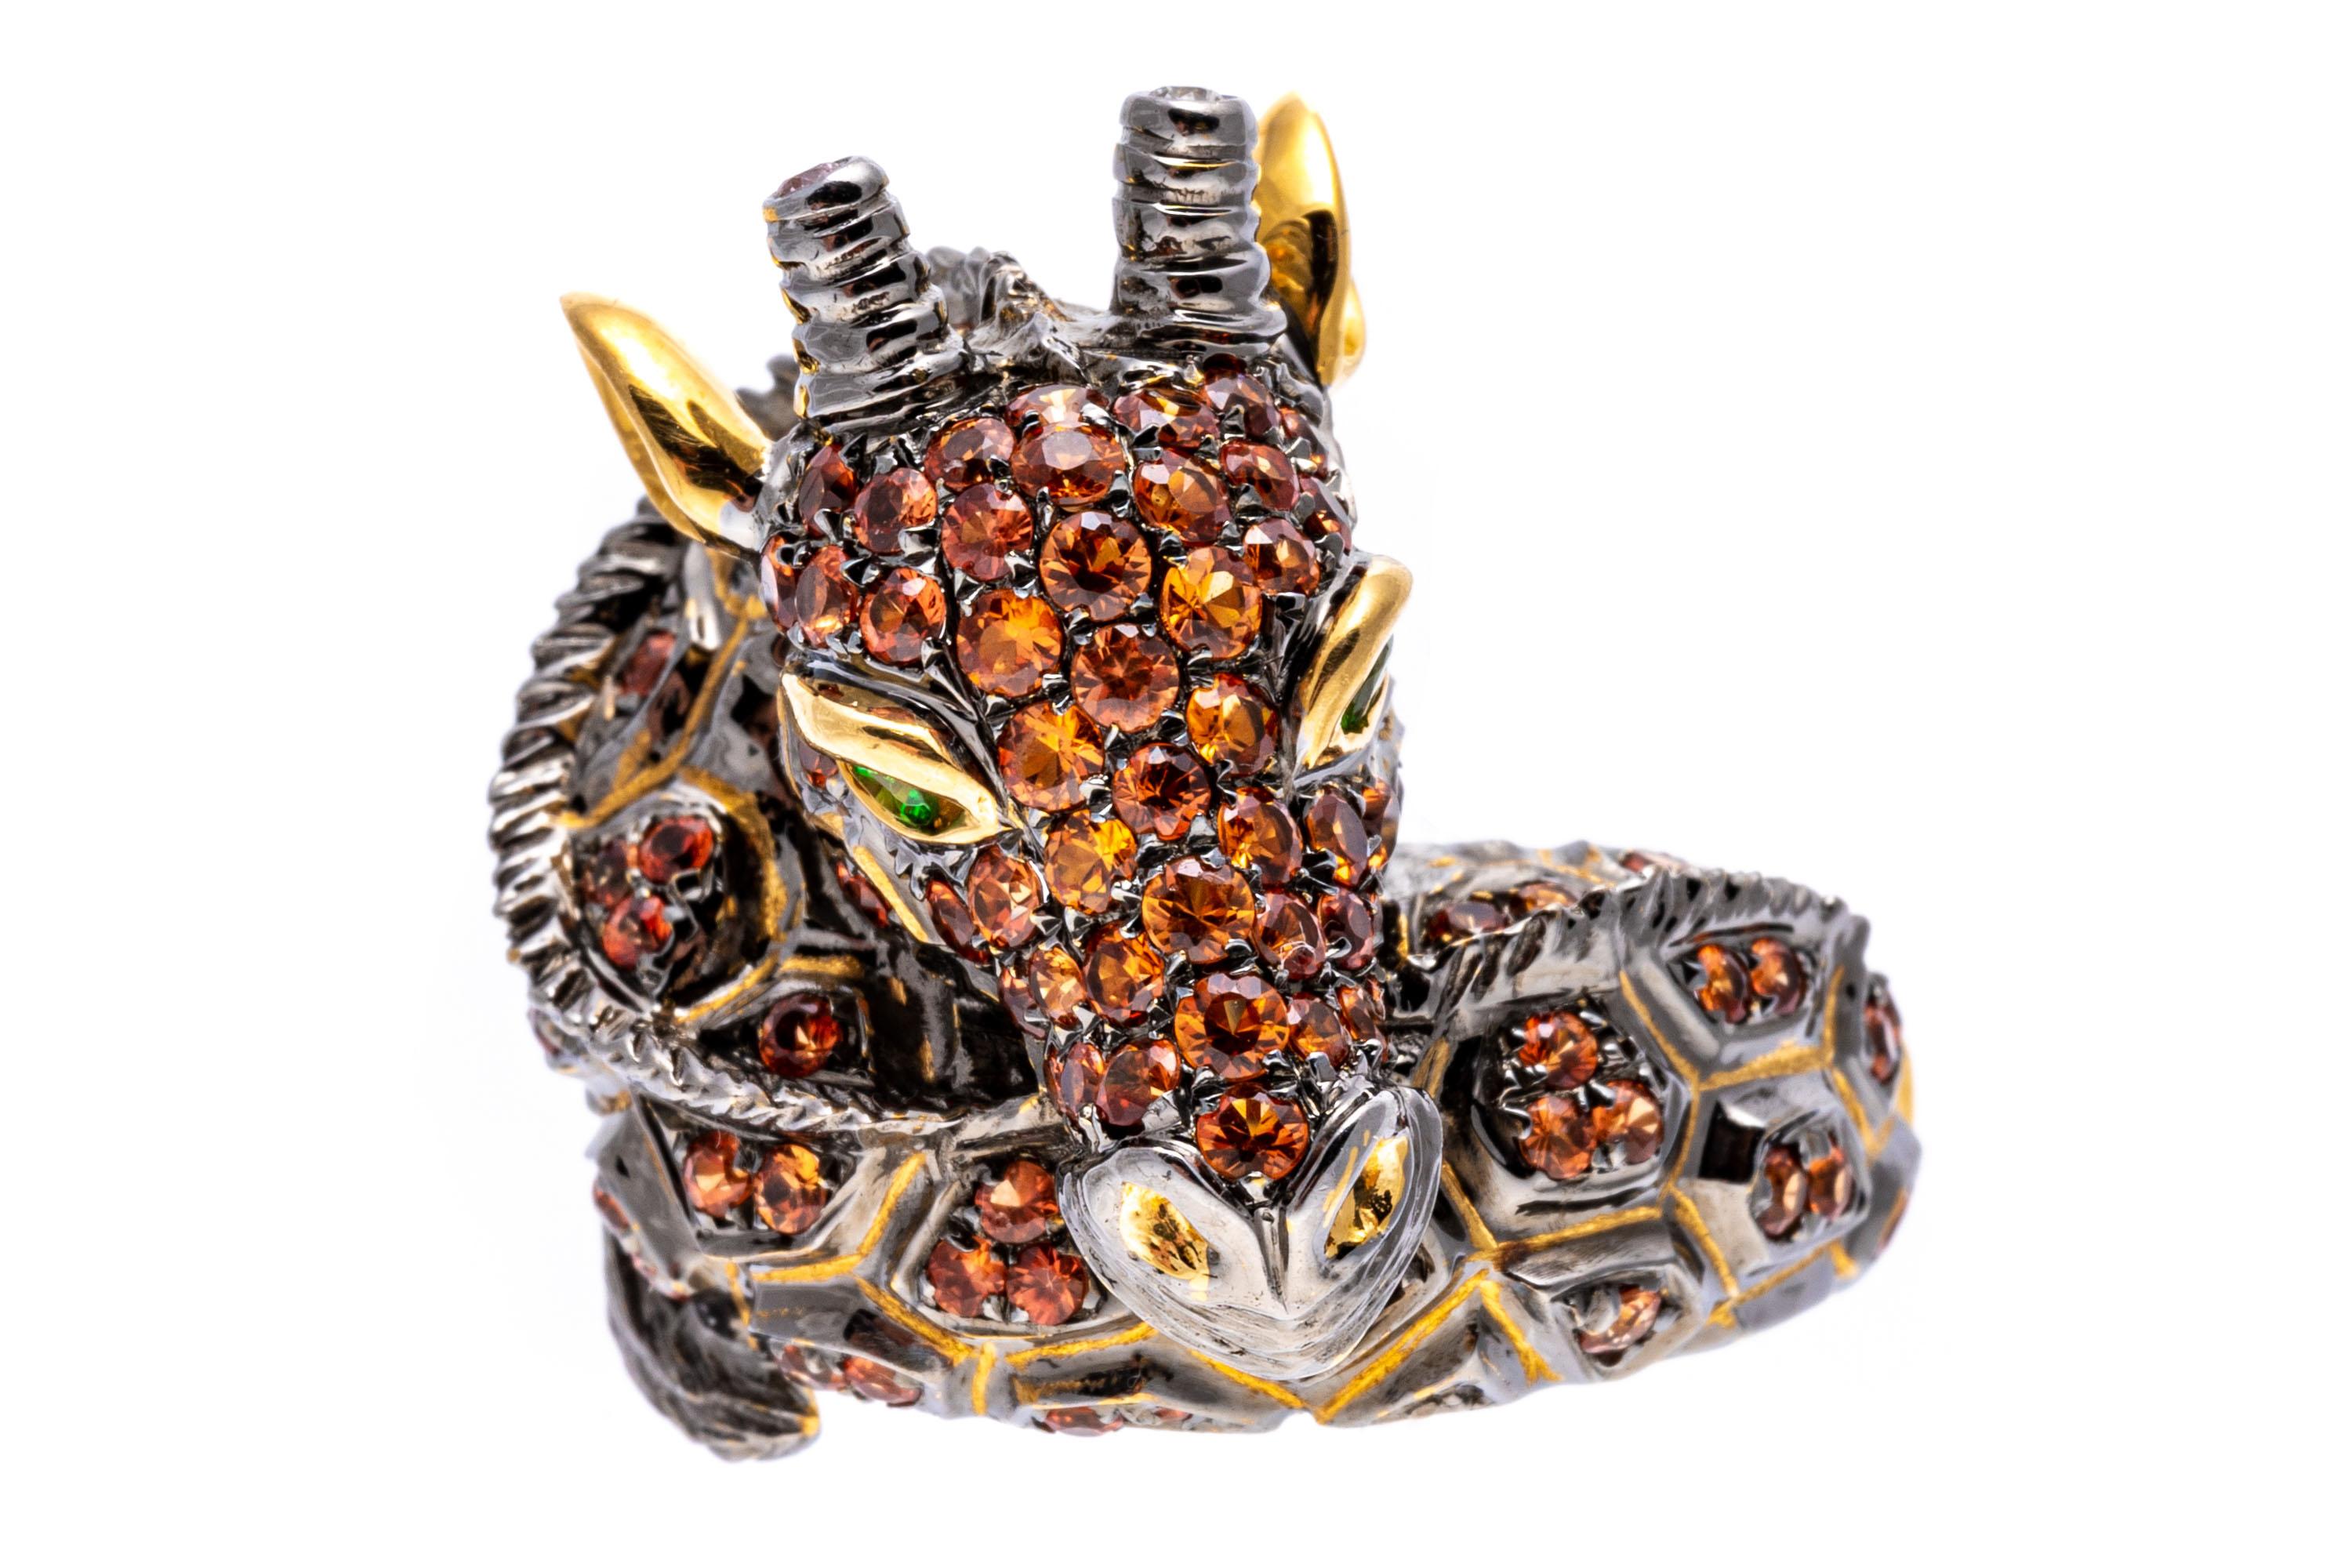 18k Yellow Gold Pave Set Topaz Patterned Figural Giraffe Ring For Sale 2